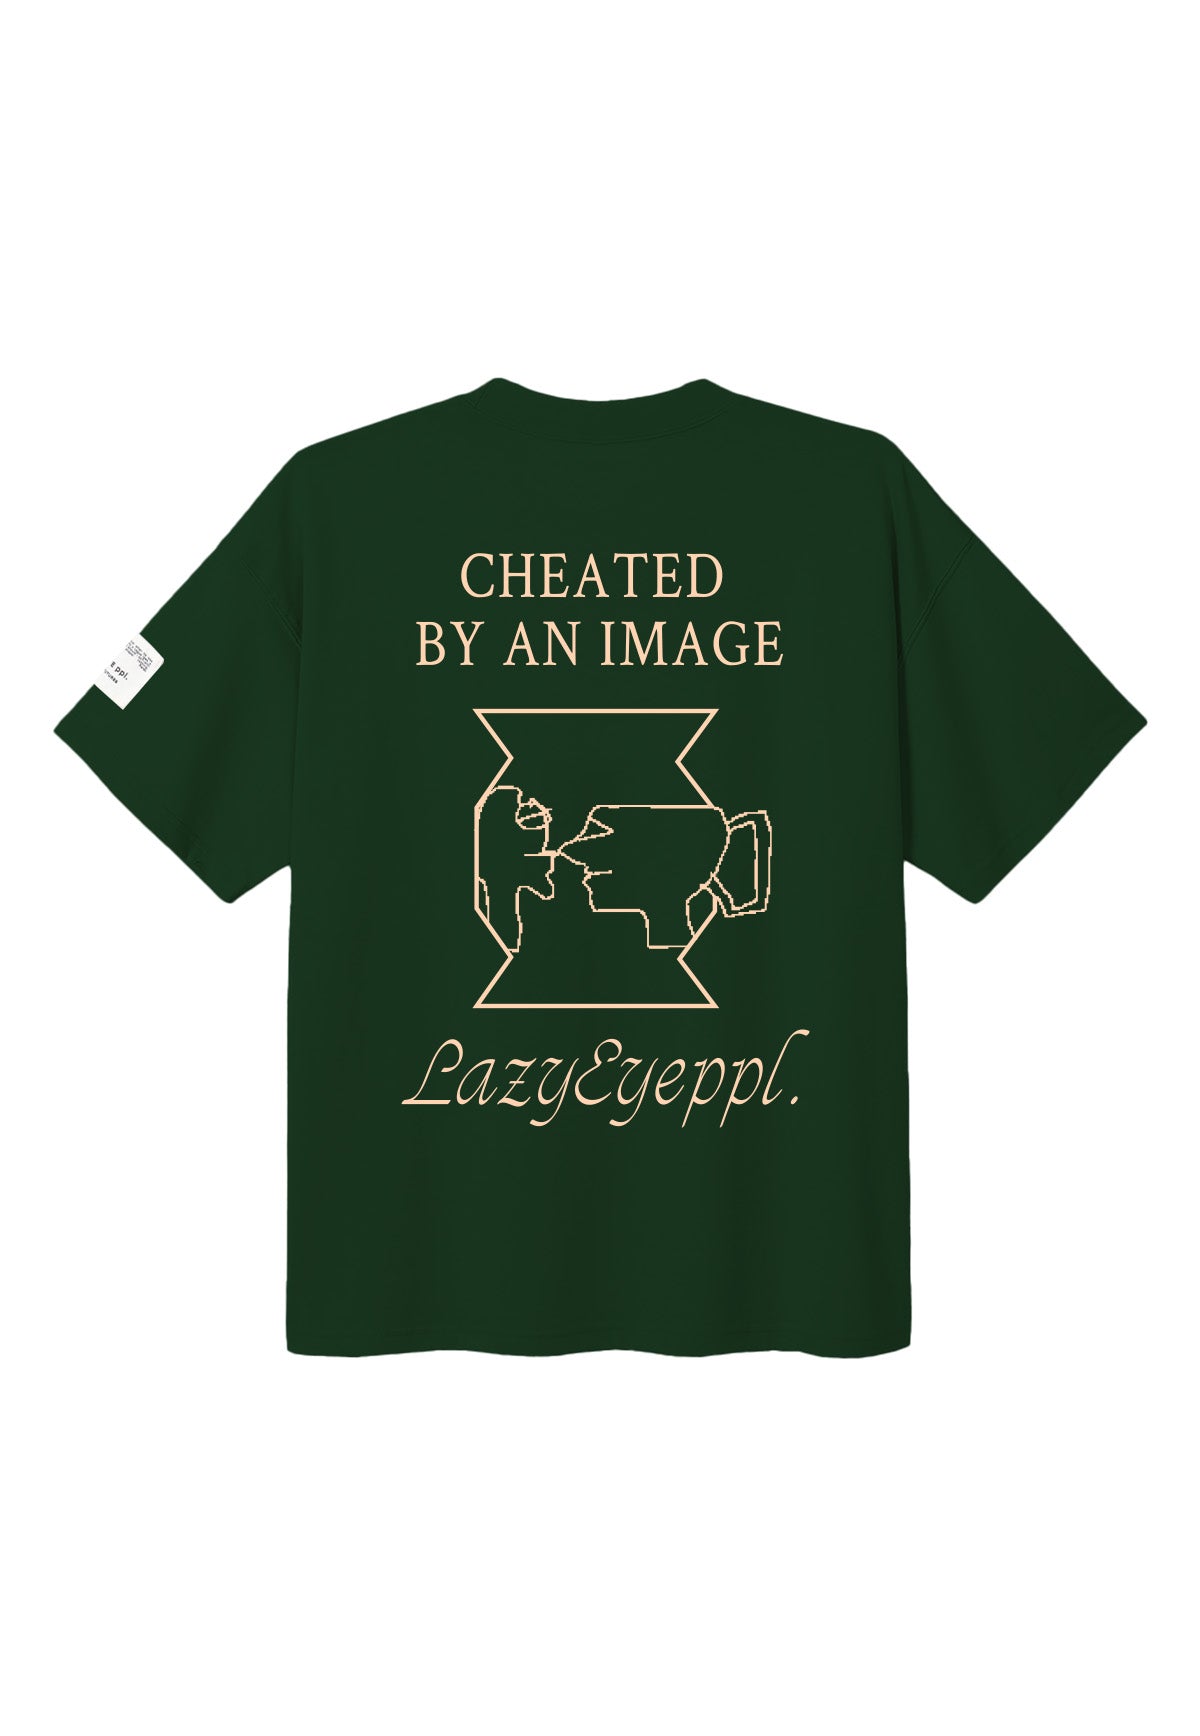 Cheated by an image / Green